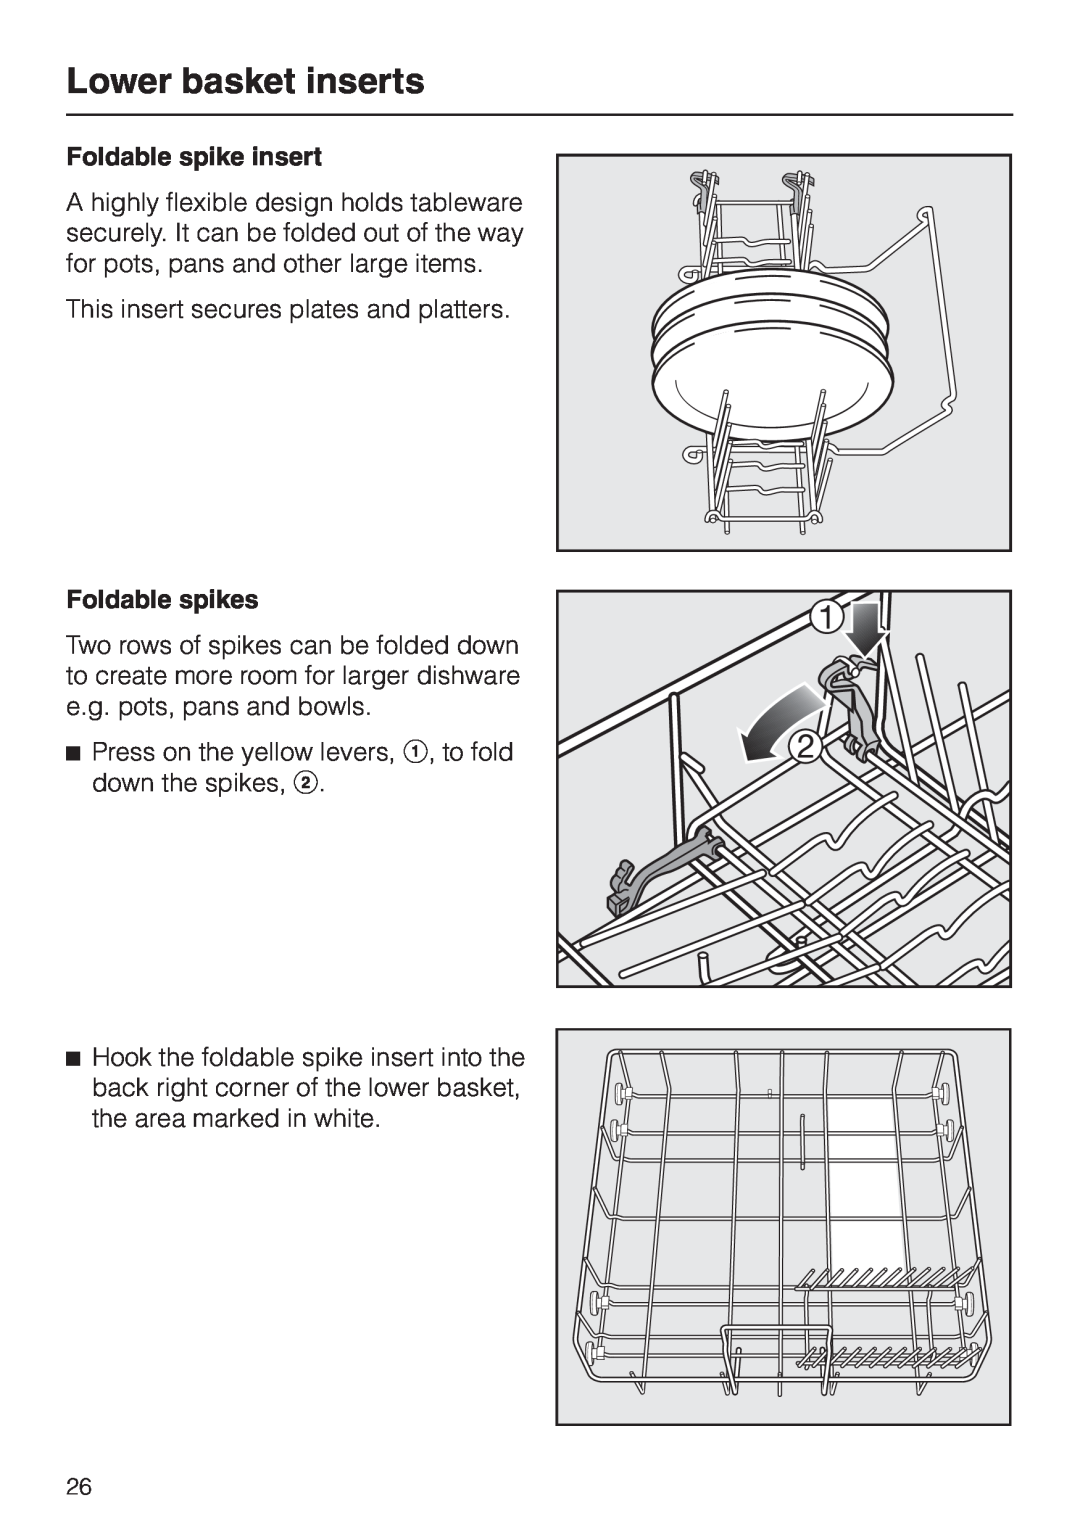 Miele G 663 Plus, G 863 Plus, 05-724-281 operating instructions Lower basket inserts, Foldable spike insert, Foldable spikes 